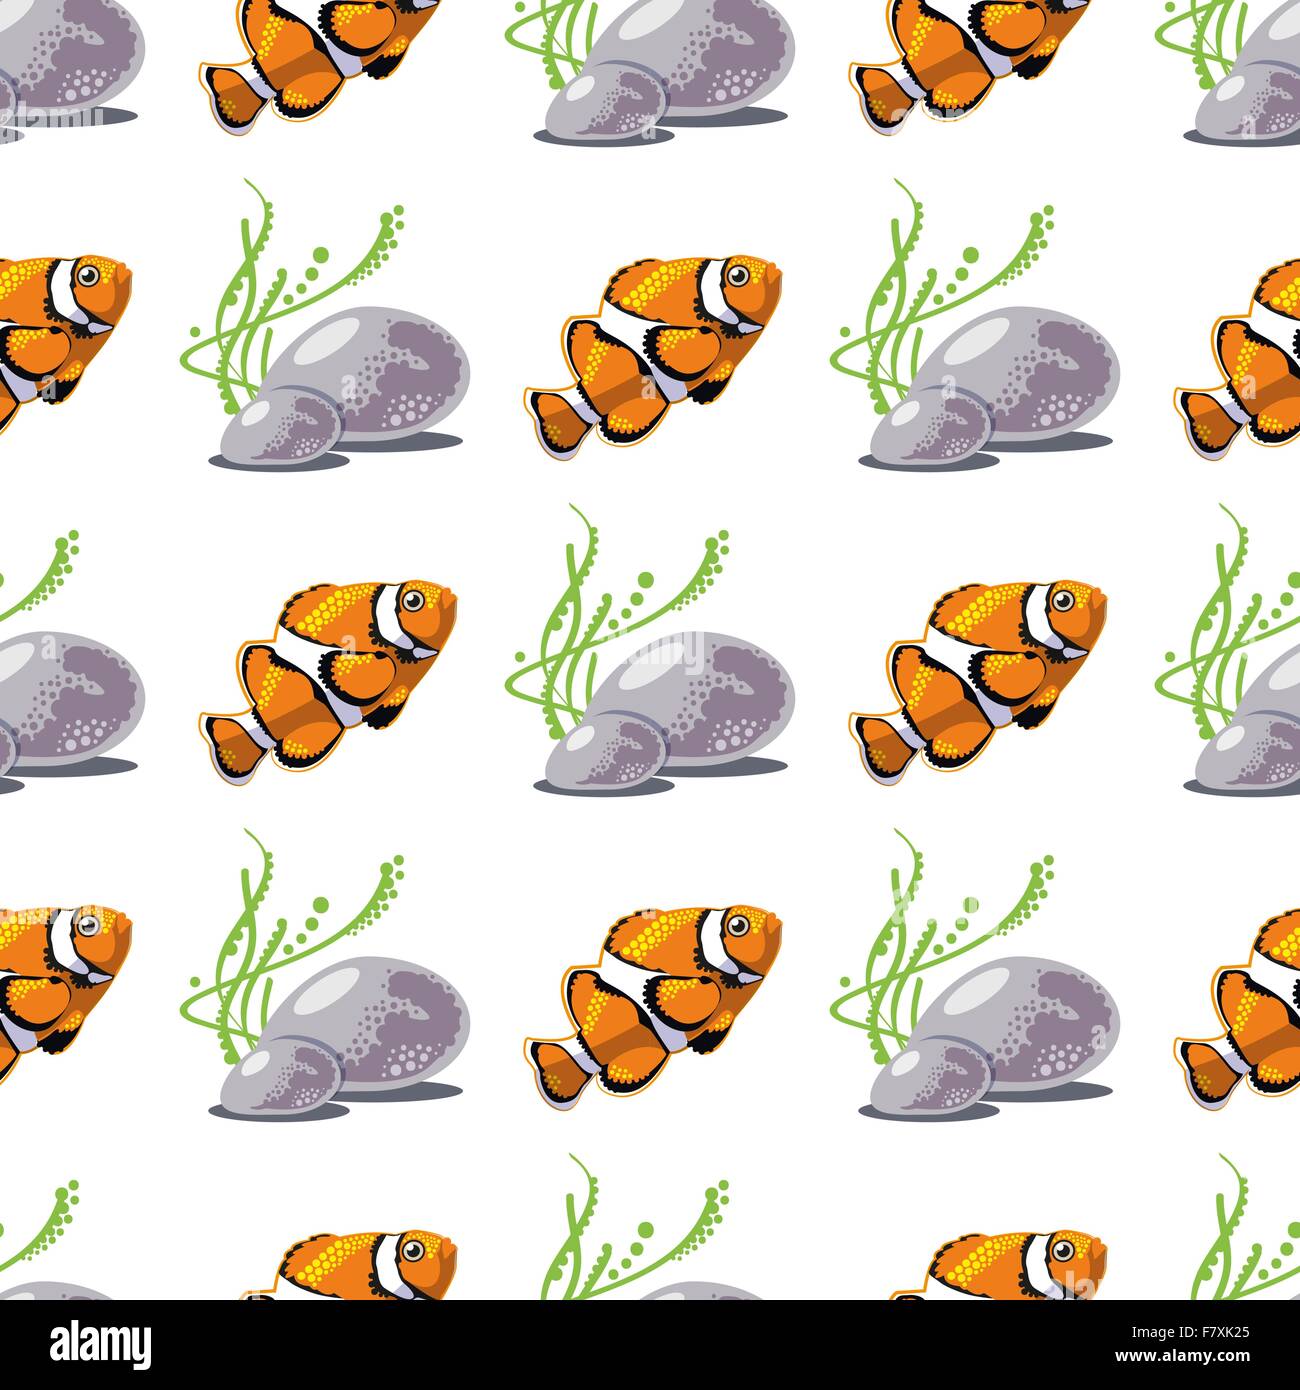 https://c8.alamy.com/comp/F7XK25/seamless-pattern-with-tropical-fish-stones-and-seaweed-at-the-bottom-F7XK25.jpg